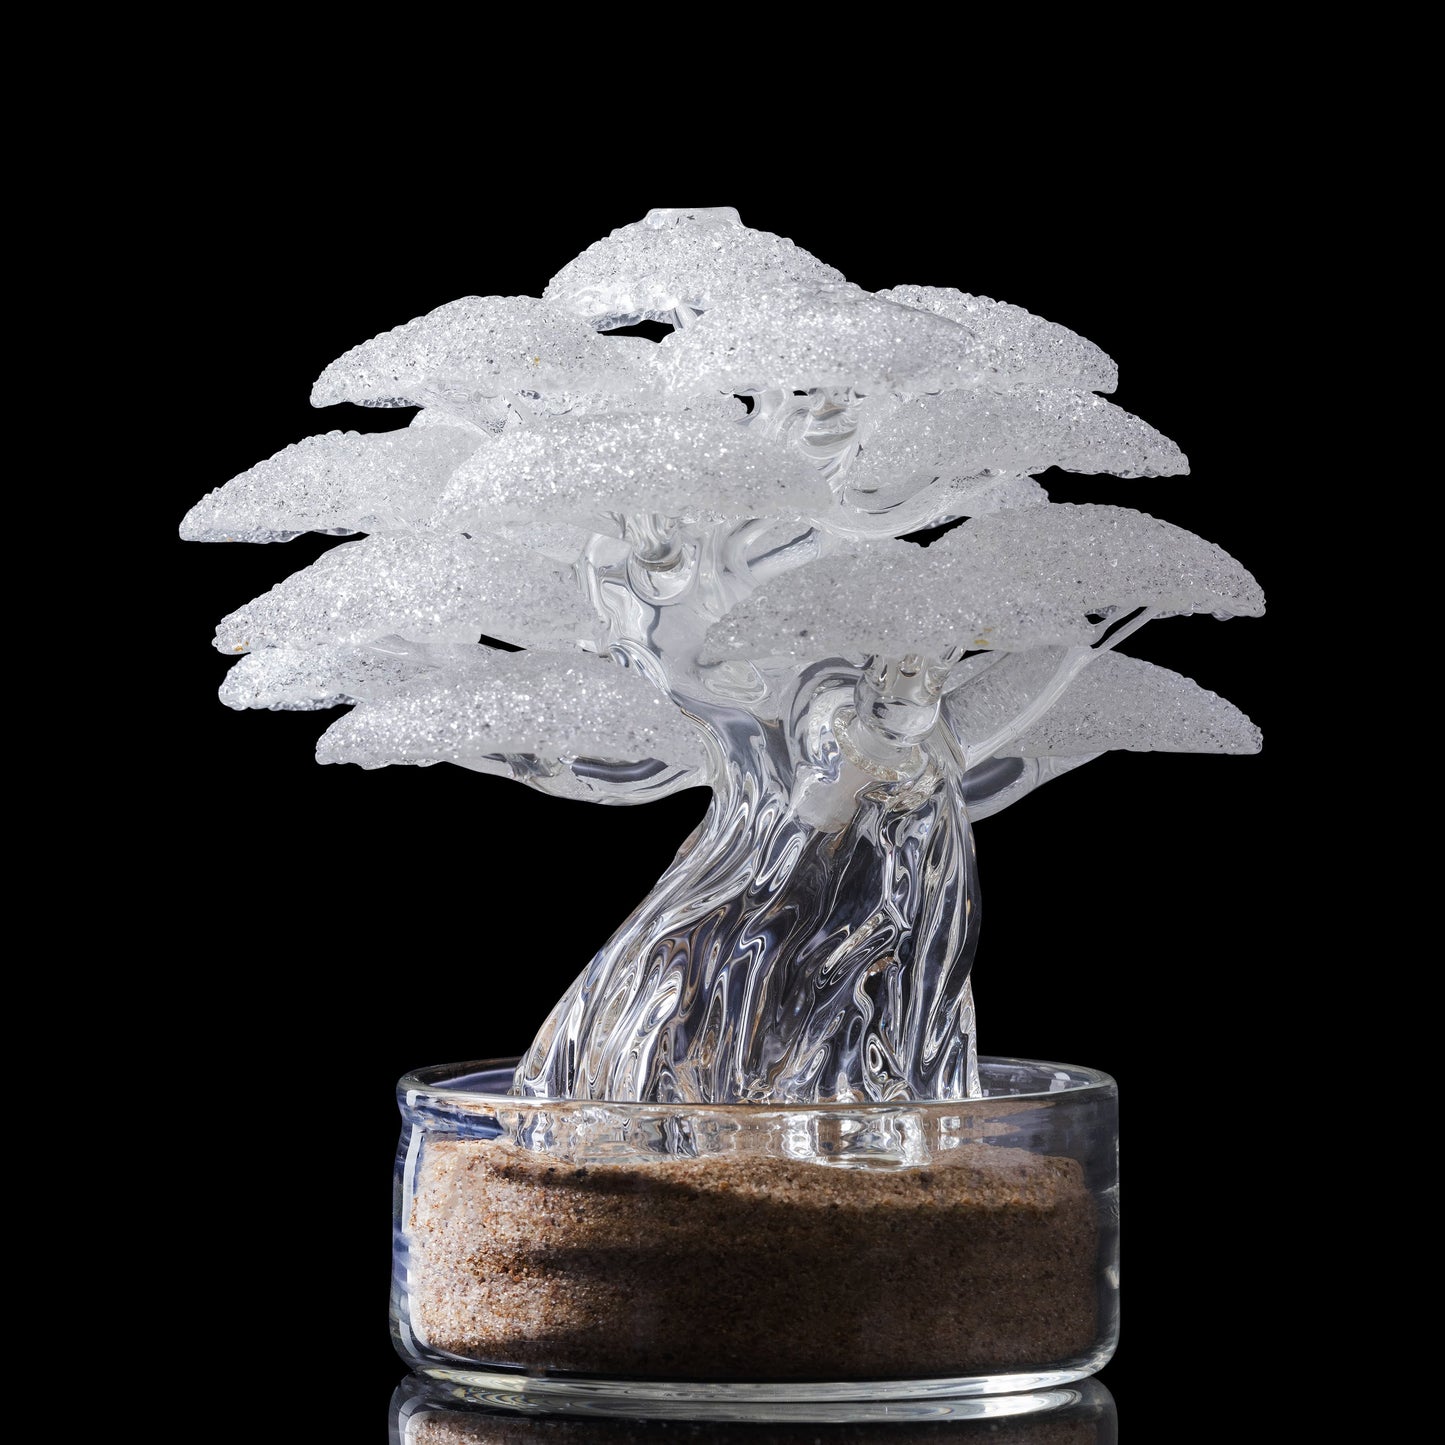 Clear Bonsai Tree (#40) by Bubbles the Butcher